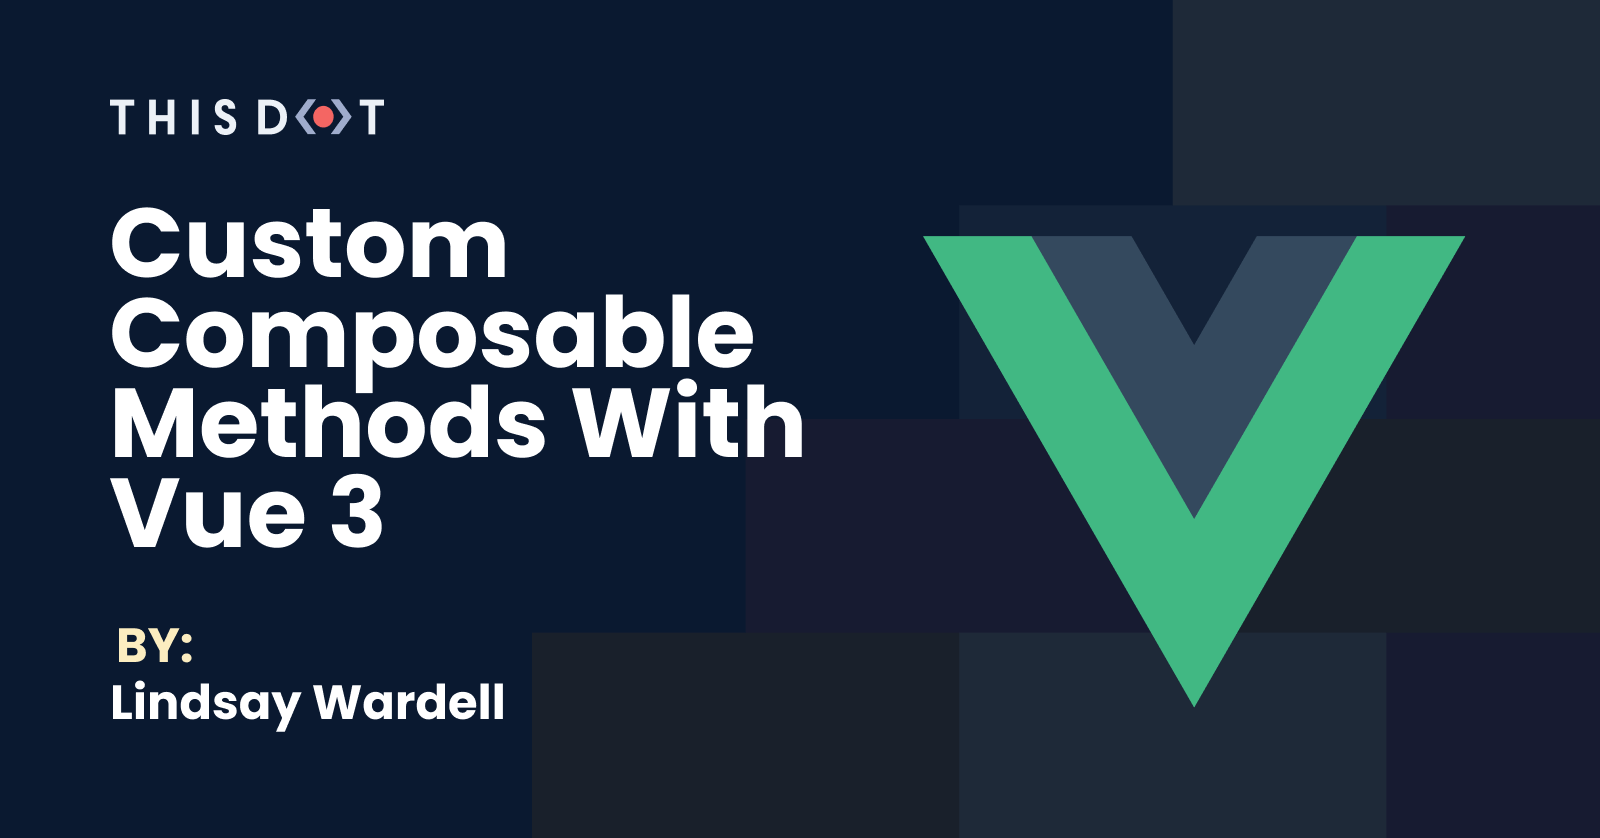 Custom Composable Methods with Vue 3